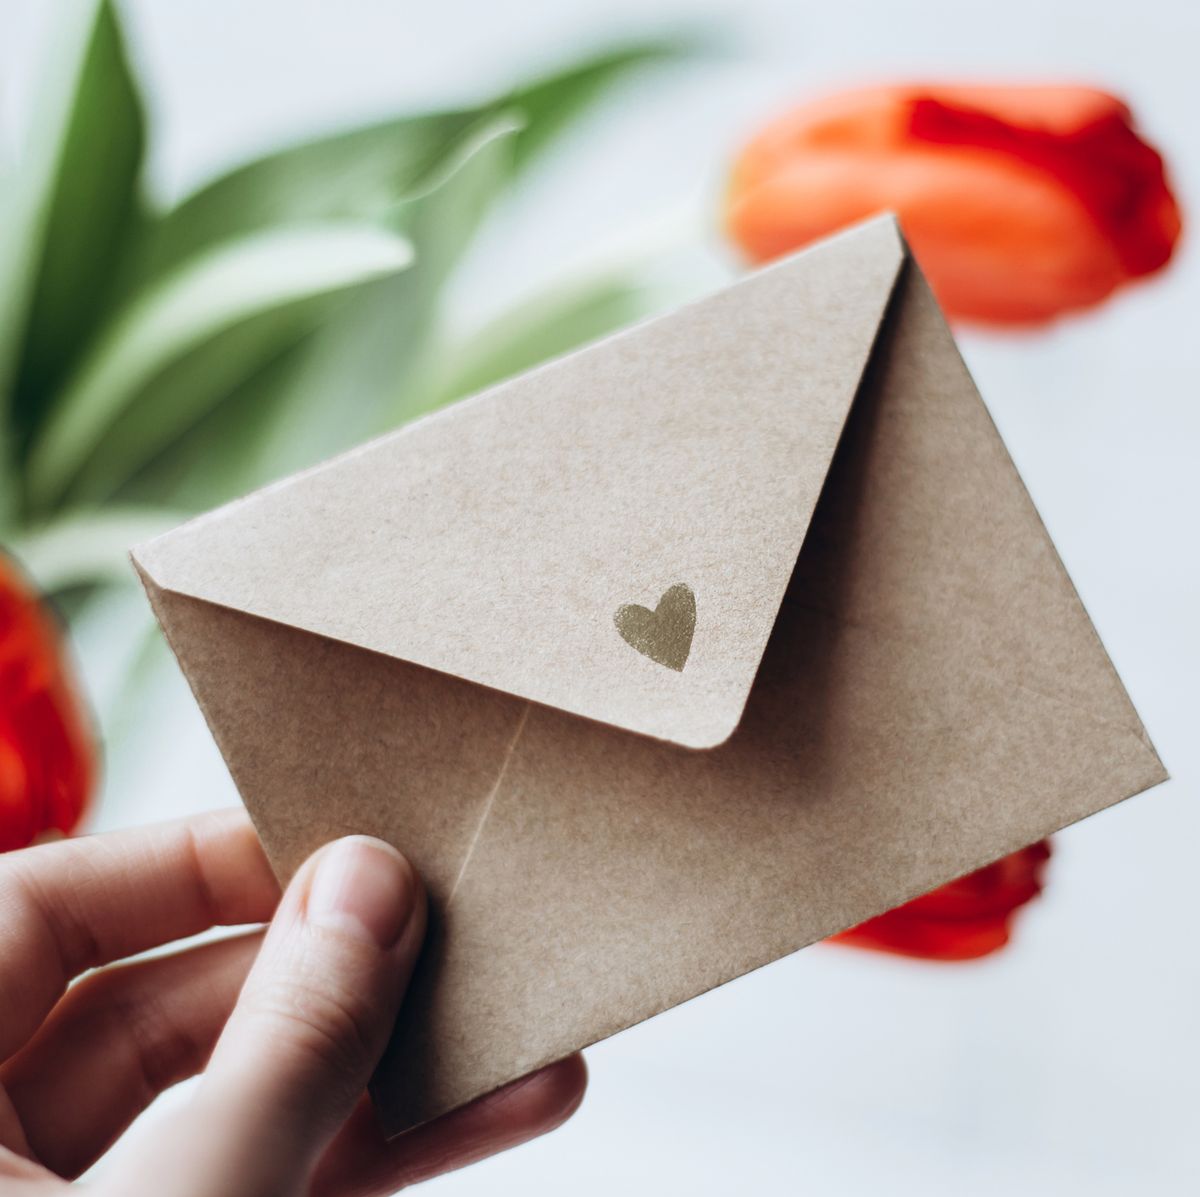 wedding card messages hand holding an open envelope with a heart on it